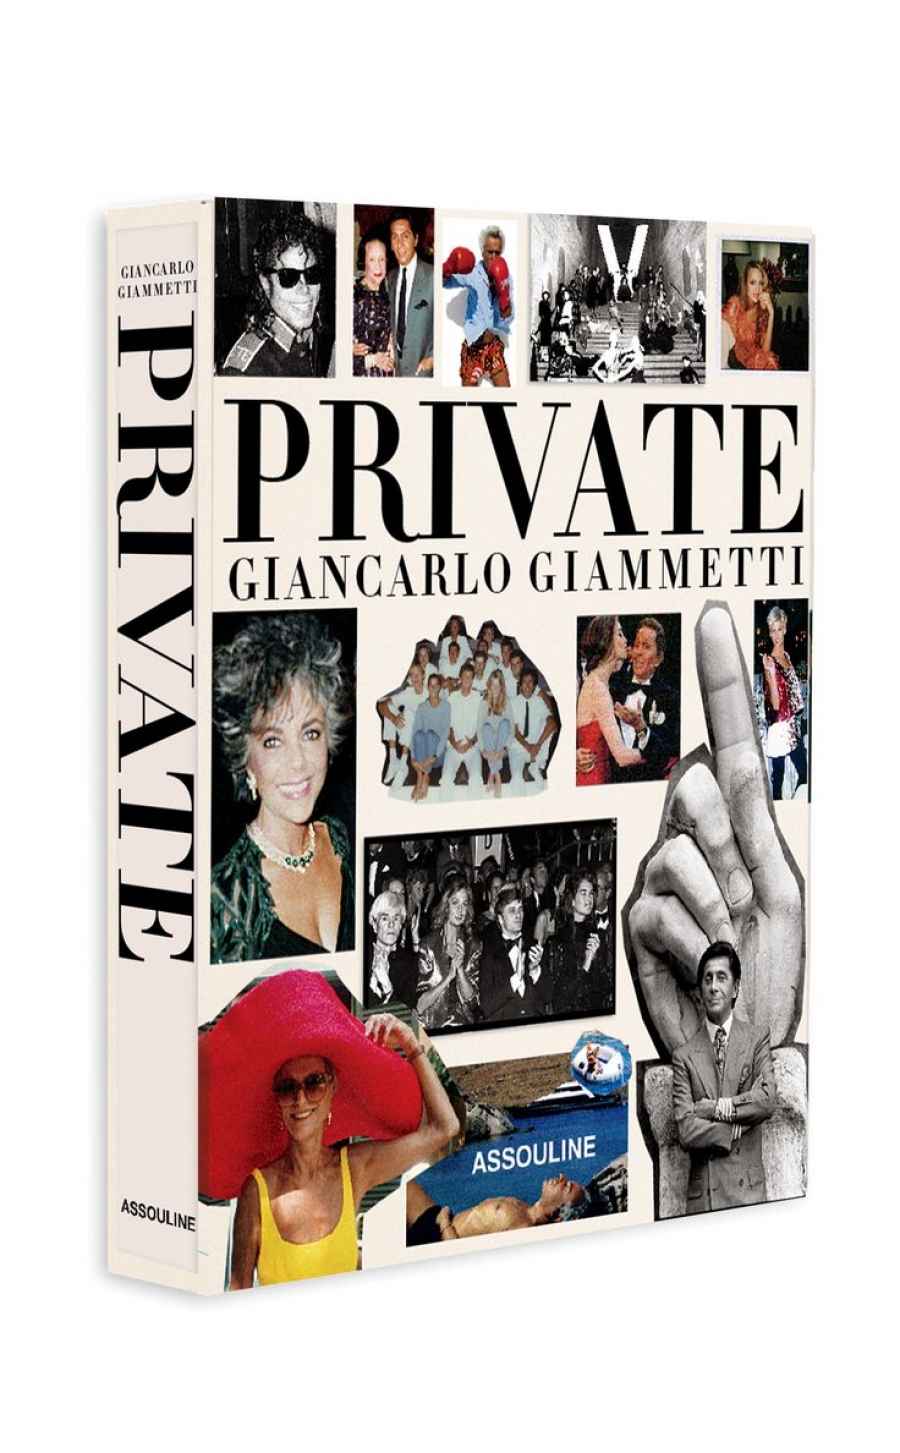 Obsessed with Private: Giancarlo Giammetti